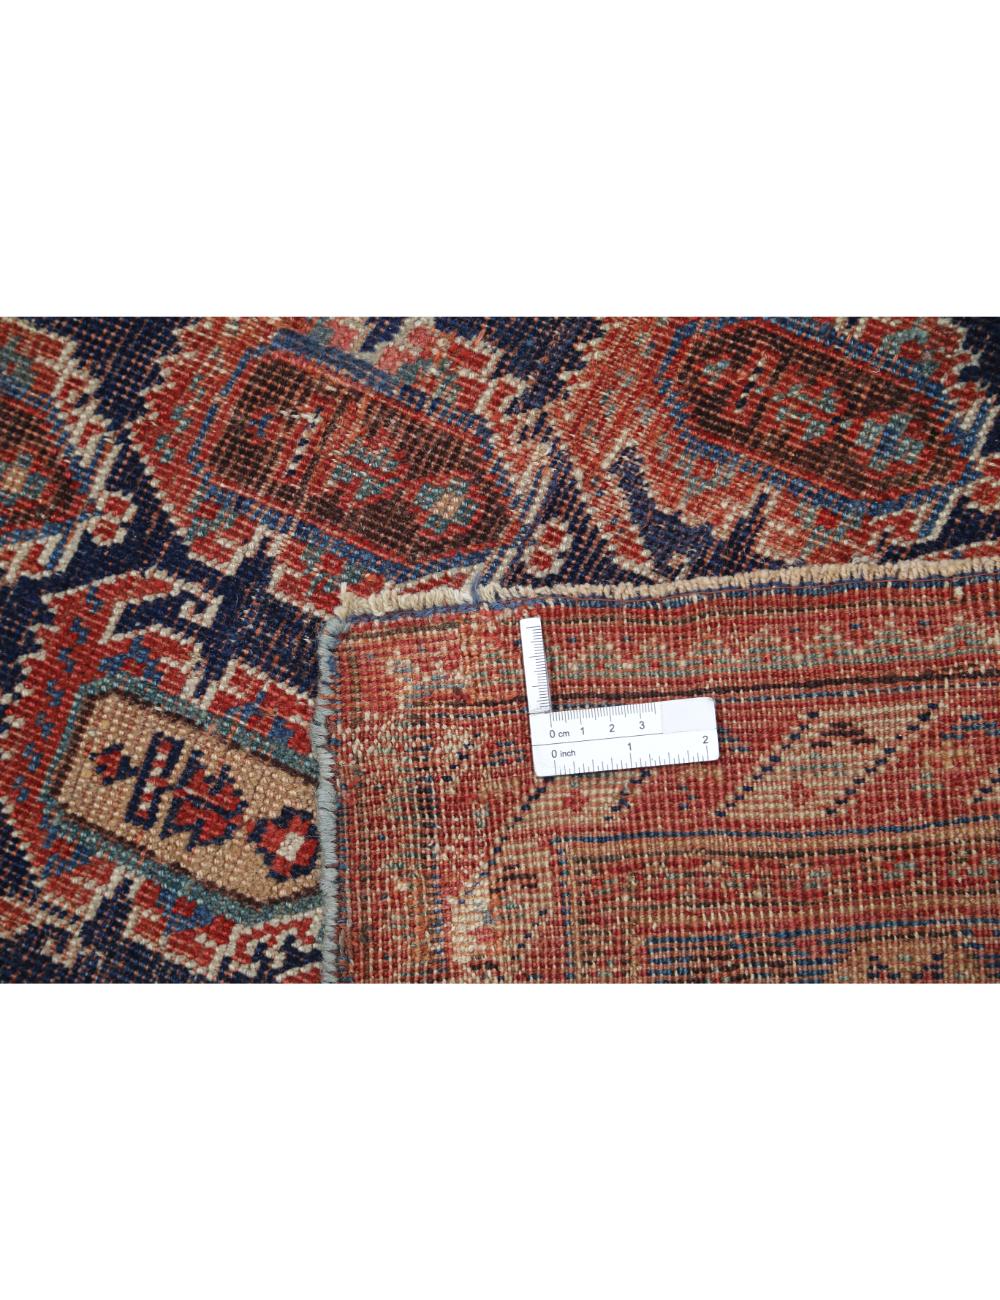 Afshar 6' 3" X 15' 1" Hand-Knotted Wool Rug 6' 3" X 15' 1" (191 X 460) / Blue / Rust